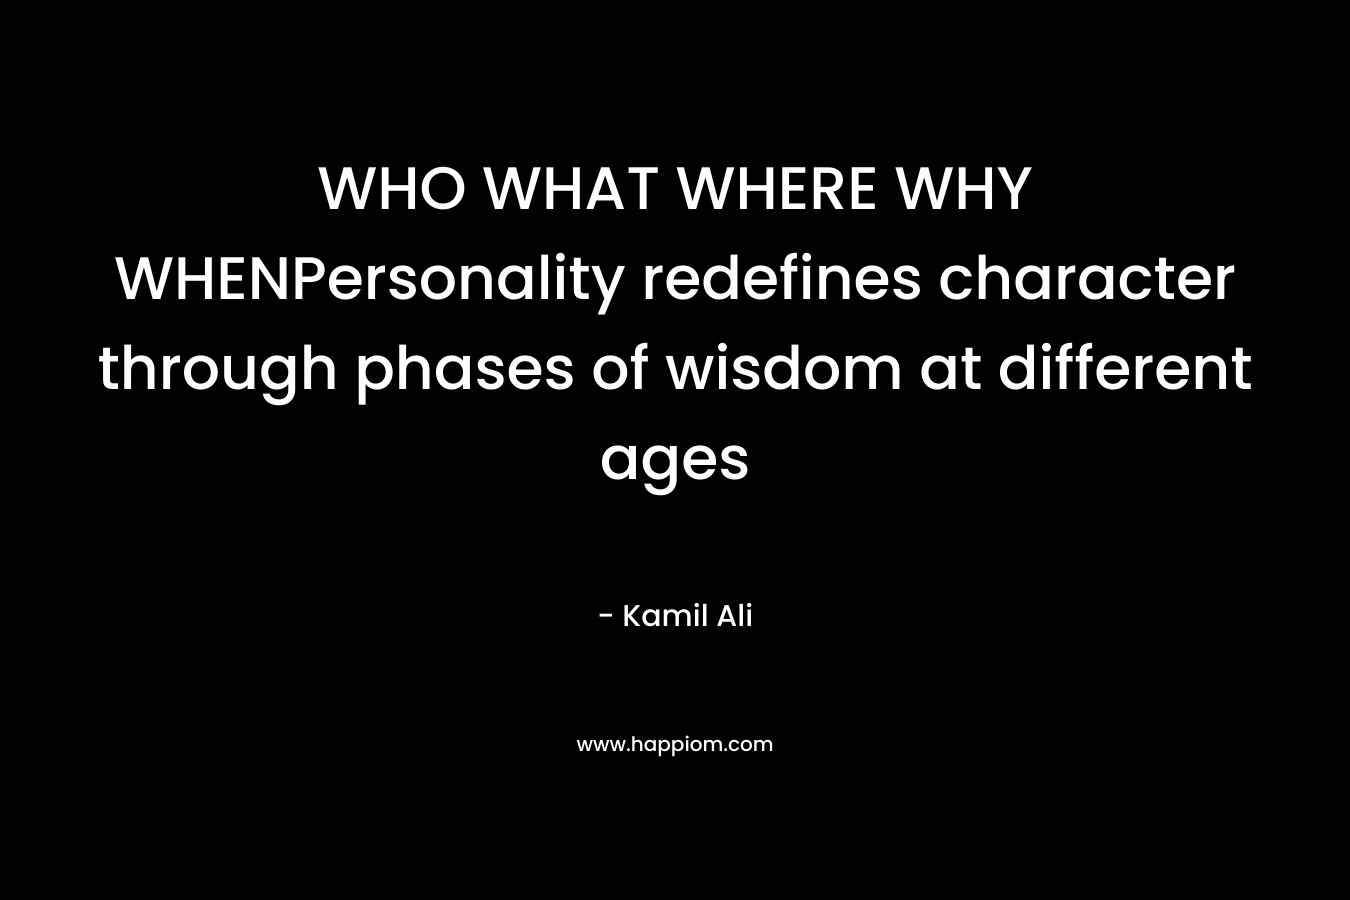 WHO WHAT WHERE WHY WHENPersonality redefines character through phases of wisdom at different ages